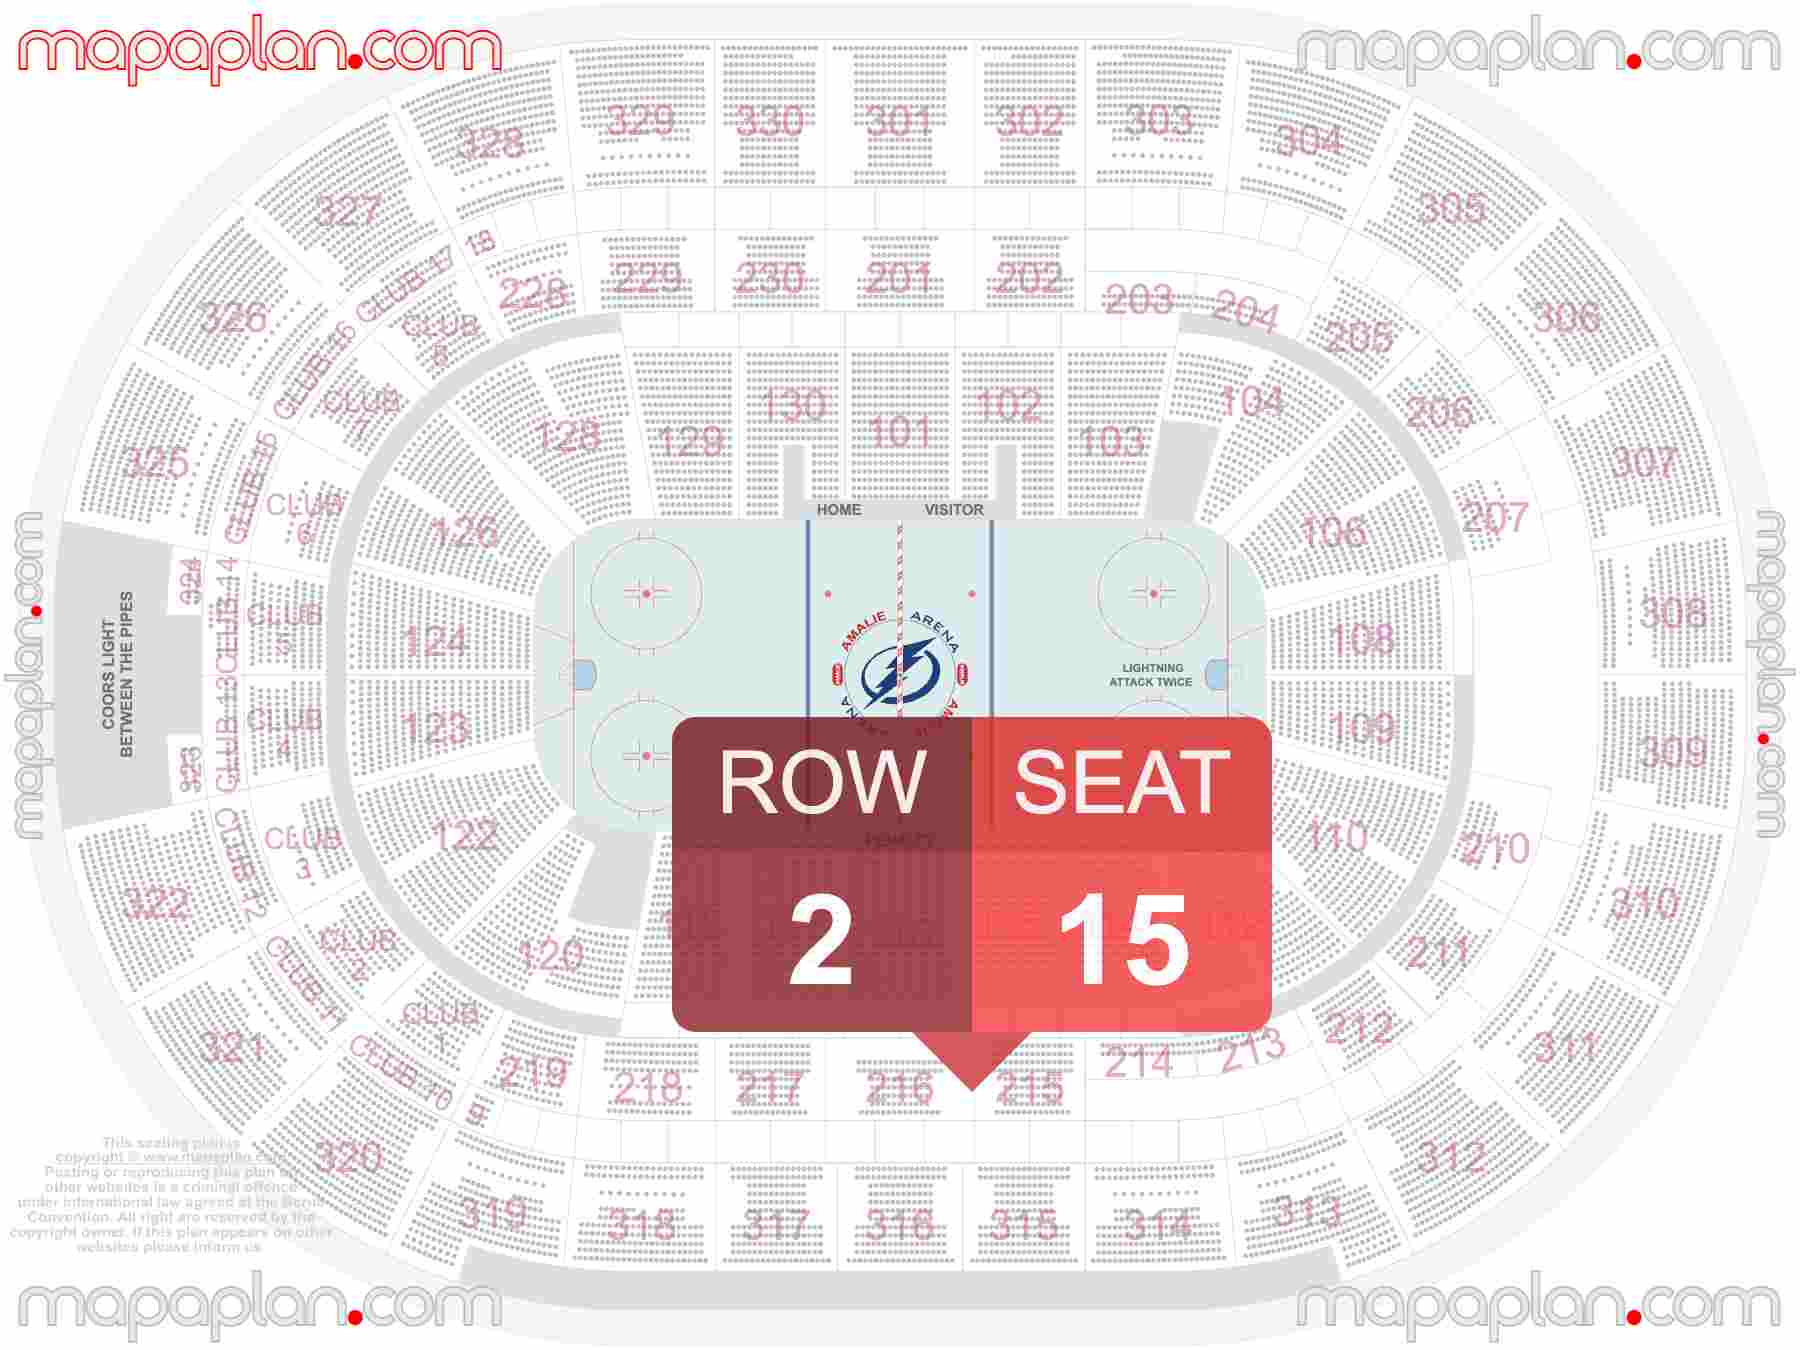 Tampa Amalie Arena seating chart Tampa Bay Lightning hockey inside capacity view arrangement plan - Interactive virtual 3d best seats & rows detailed stadium image configuration layout